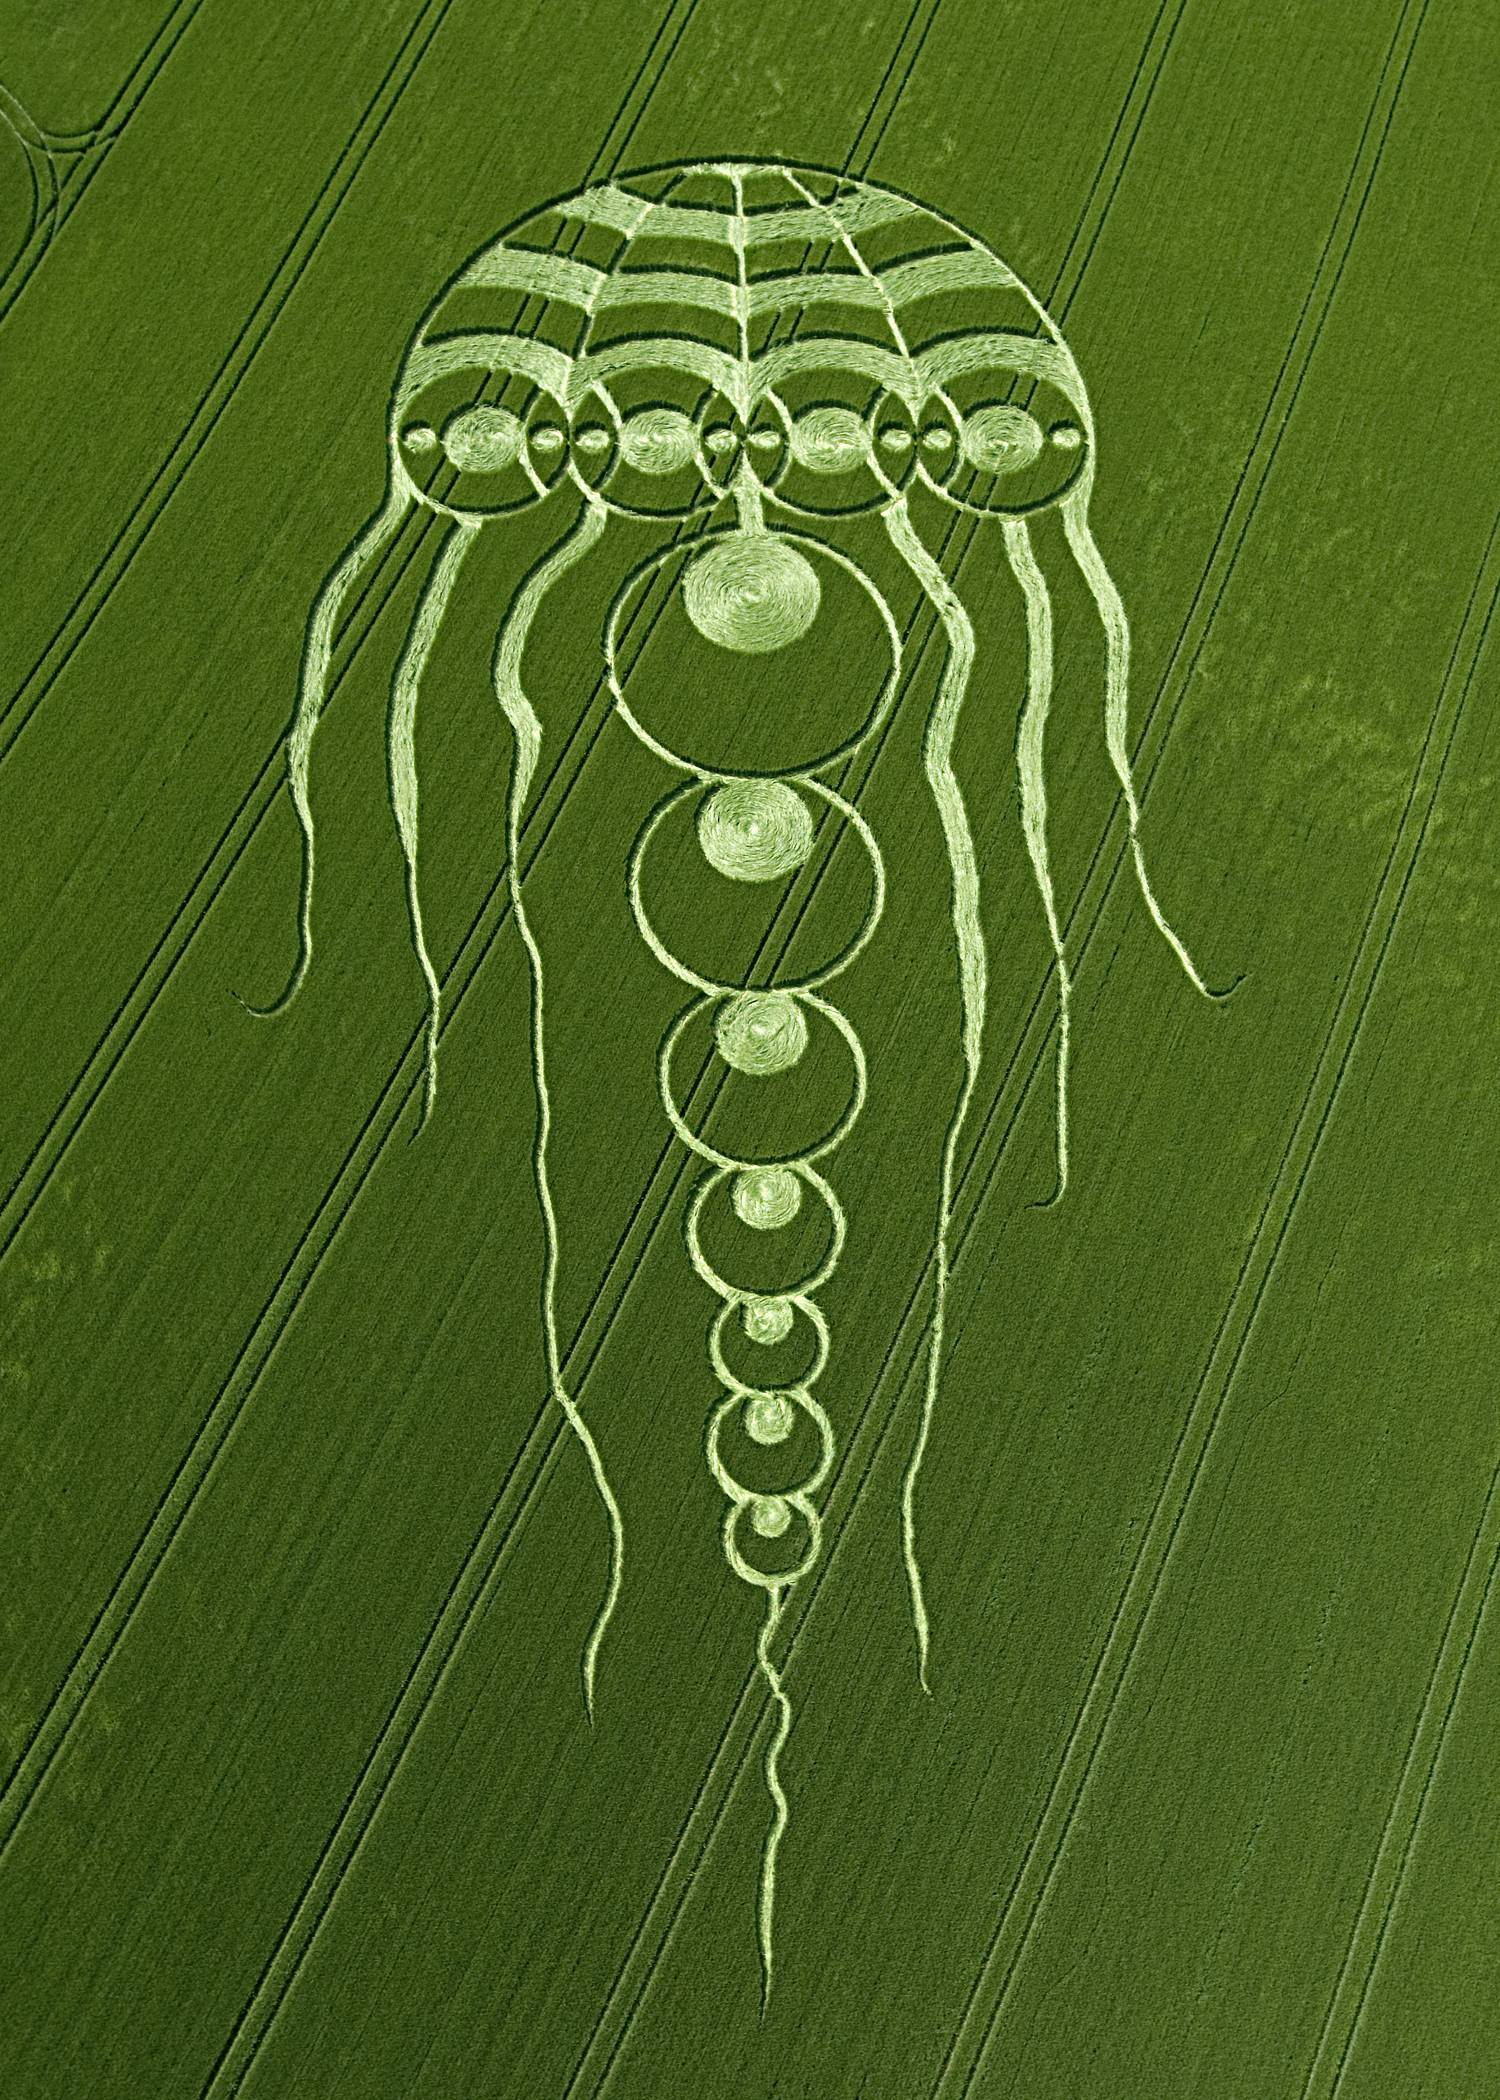 image For > Crop Circle Meanings